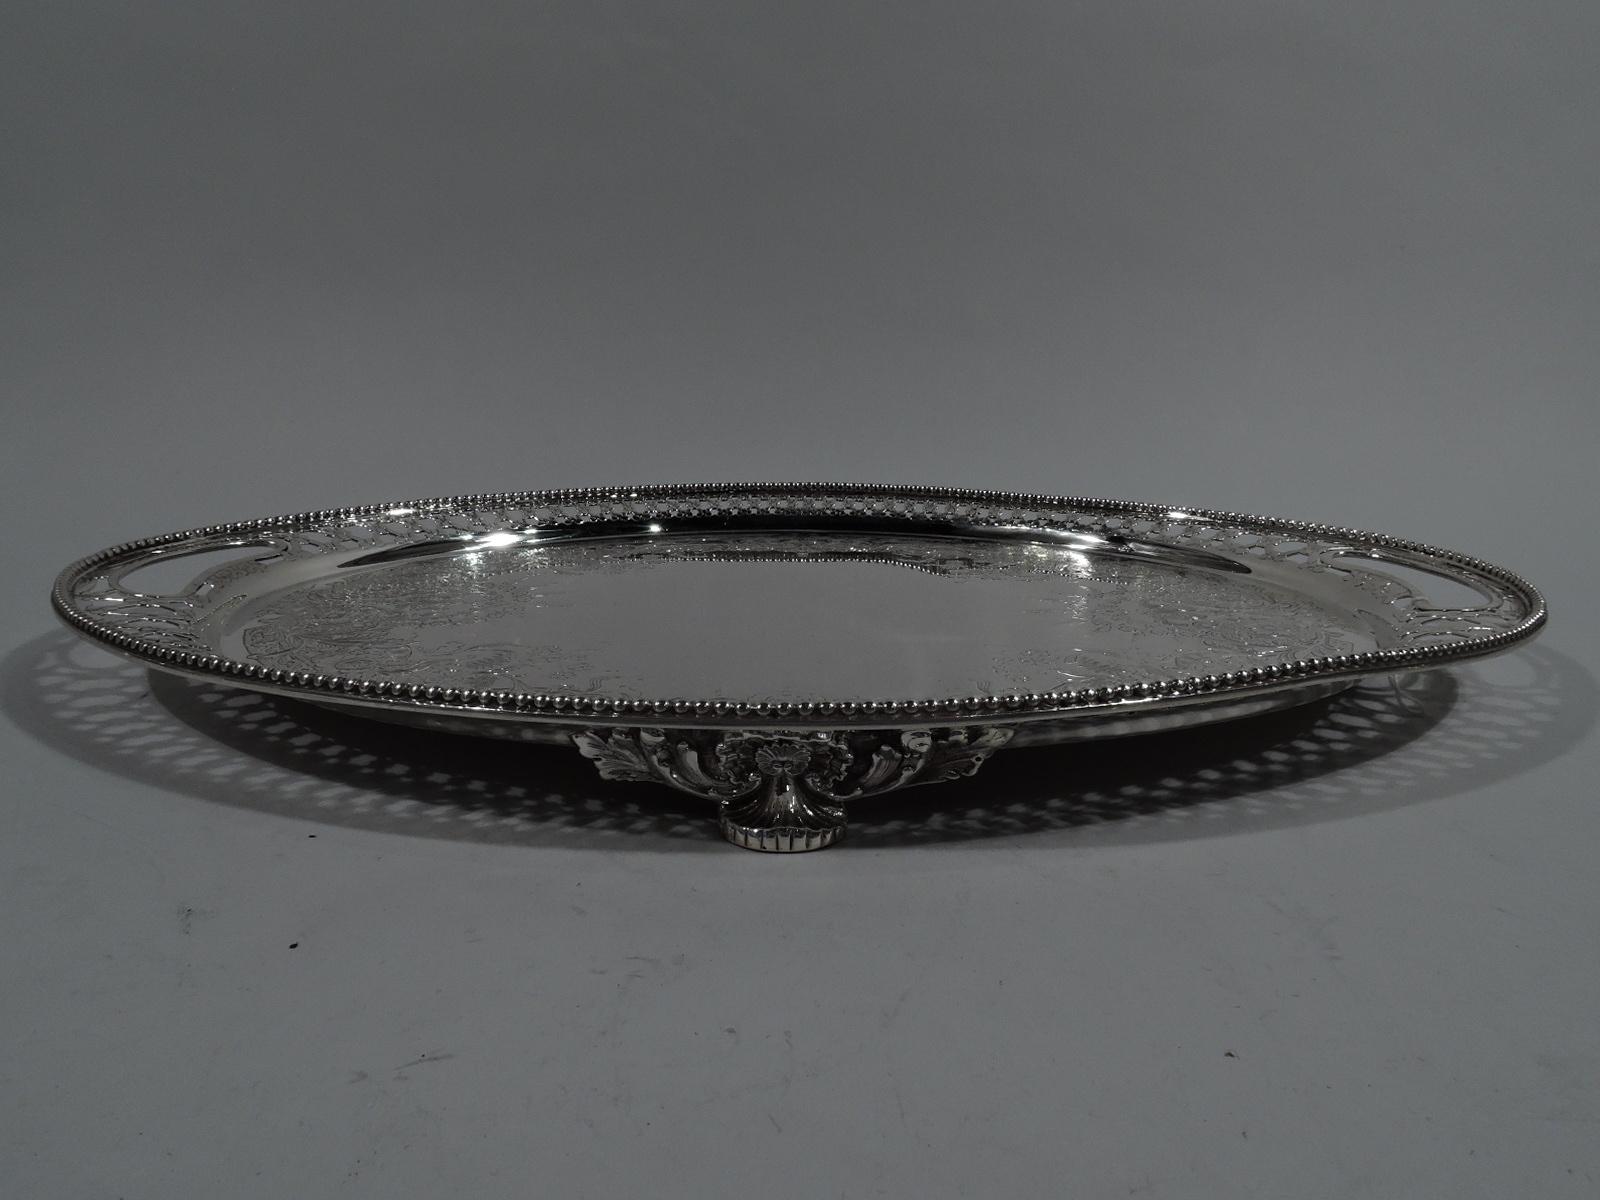 Aesthetic sterling silver salver. Made by Tiffany & Co. in New York. Oval well with vacant center surrounded by engraved ornament: semi-abstract flowers and scrolls spilling over beaded rinceaux border. Curved shoulder with open floral diaper and